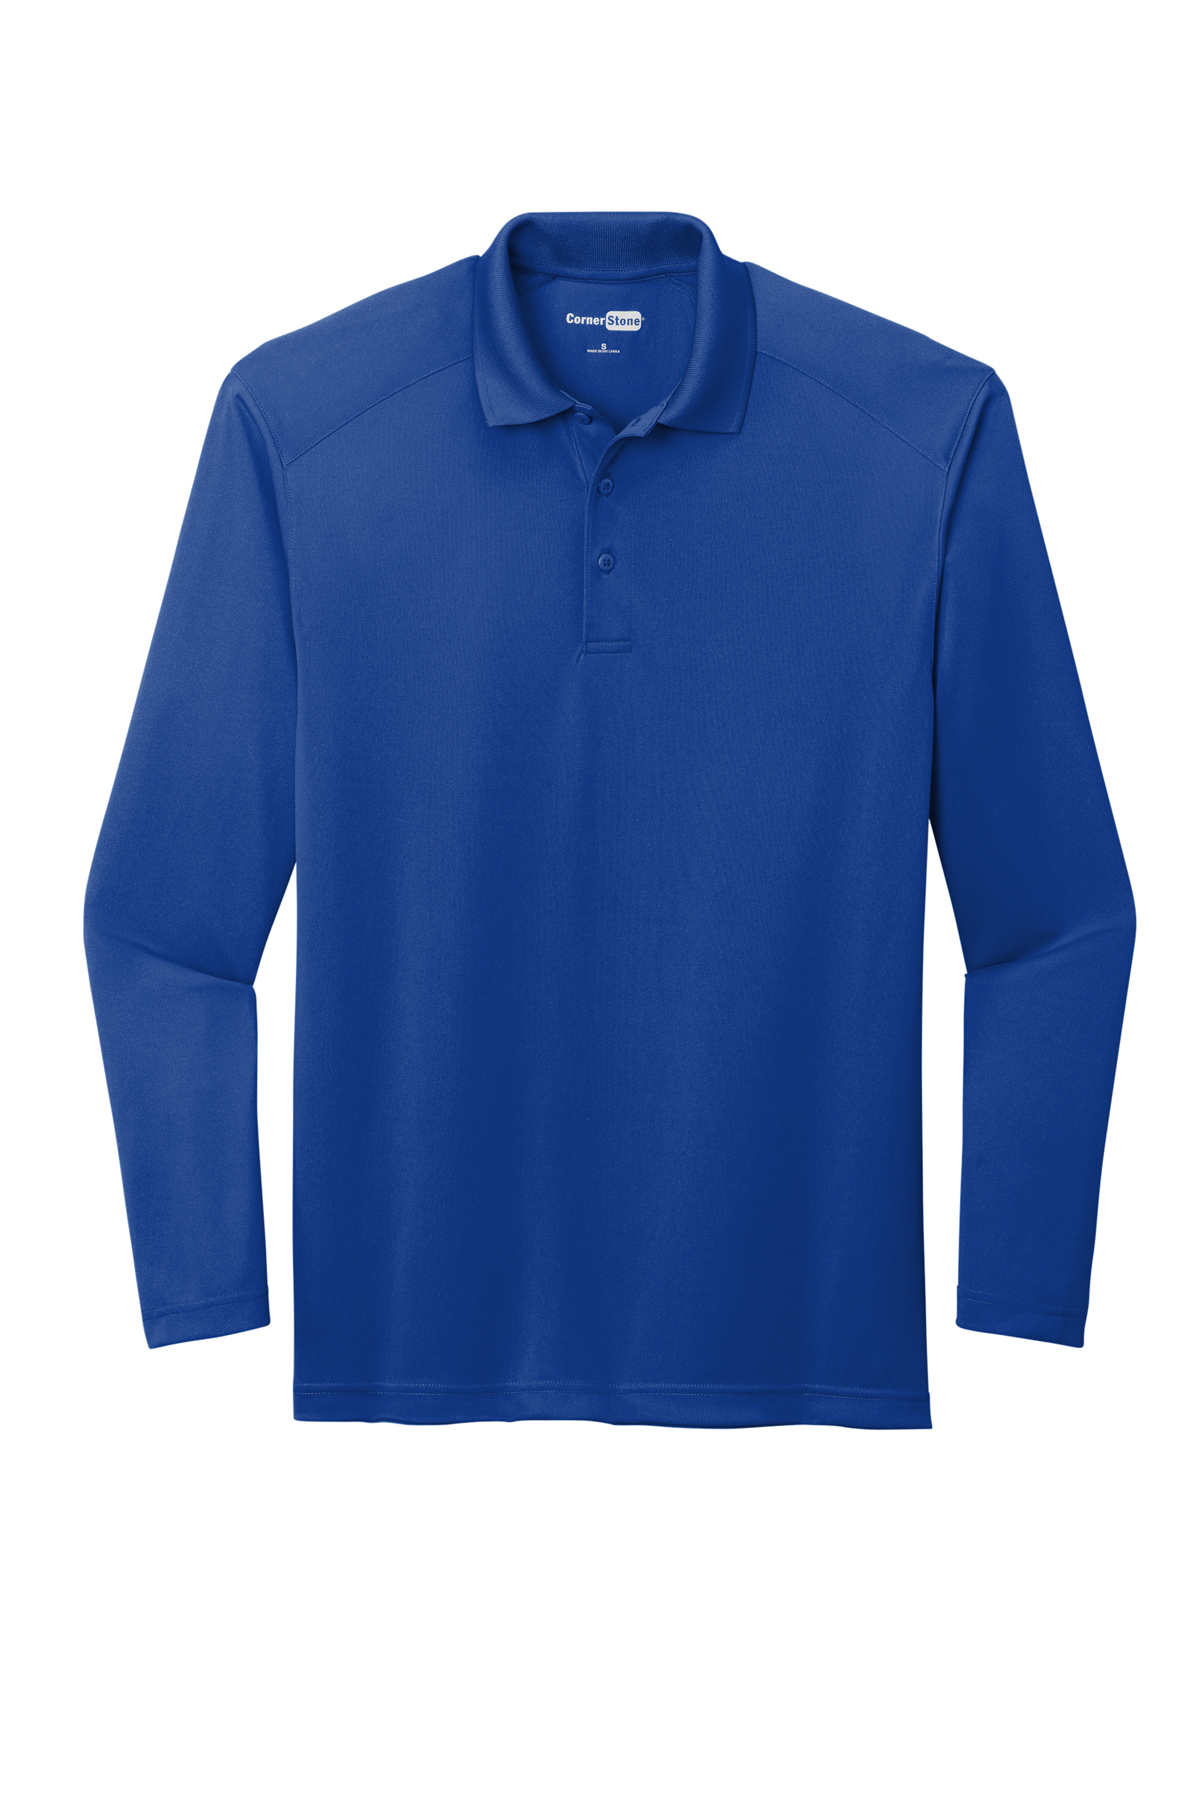 CornerStone Select Lightweight Snag-Proof Long Sleeve Polo | Product ...